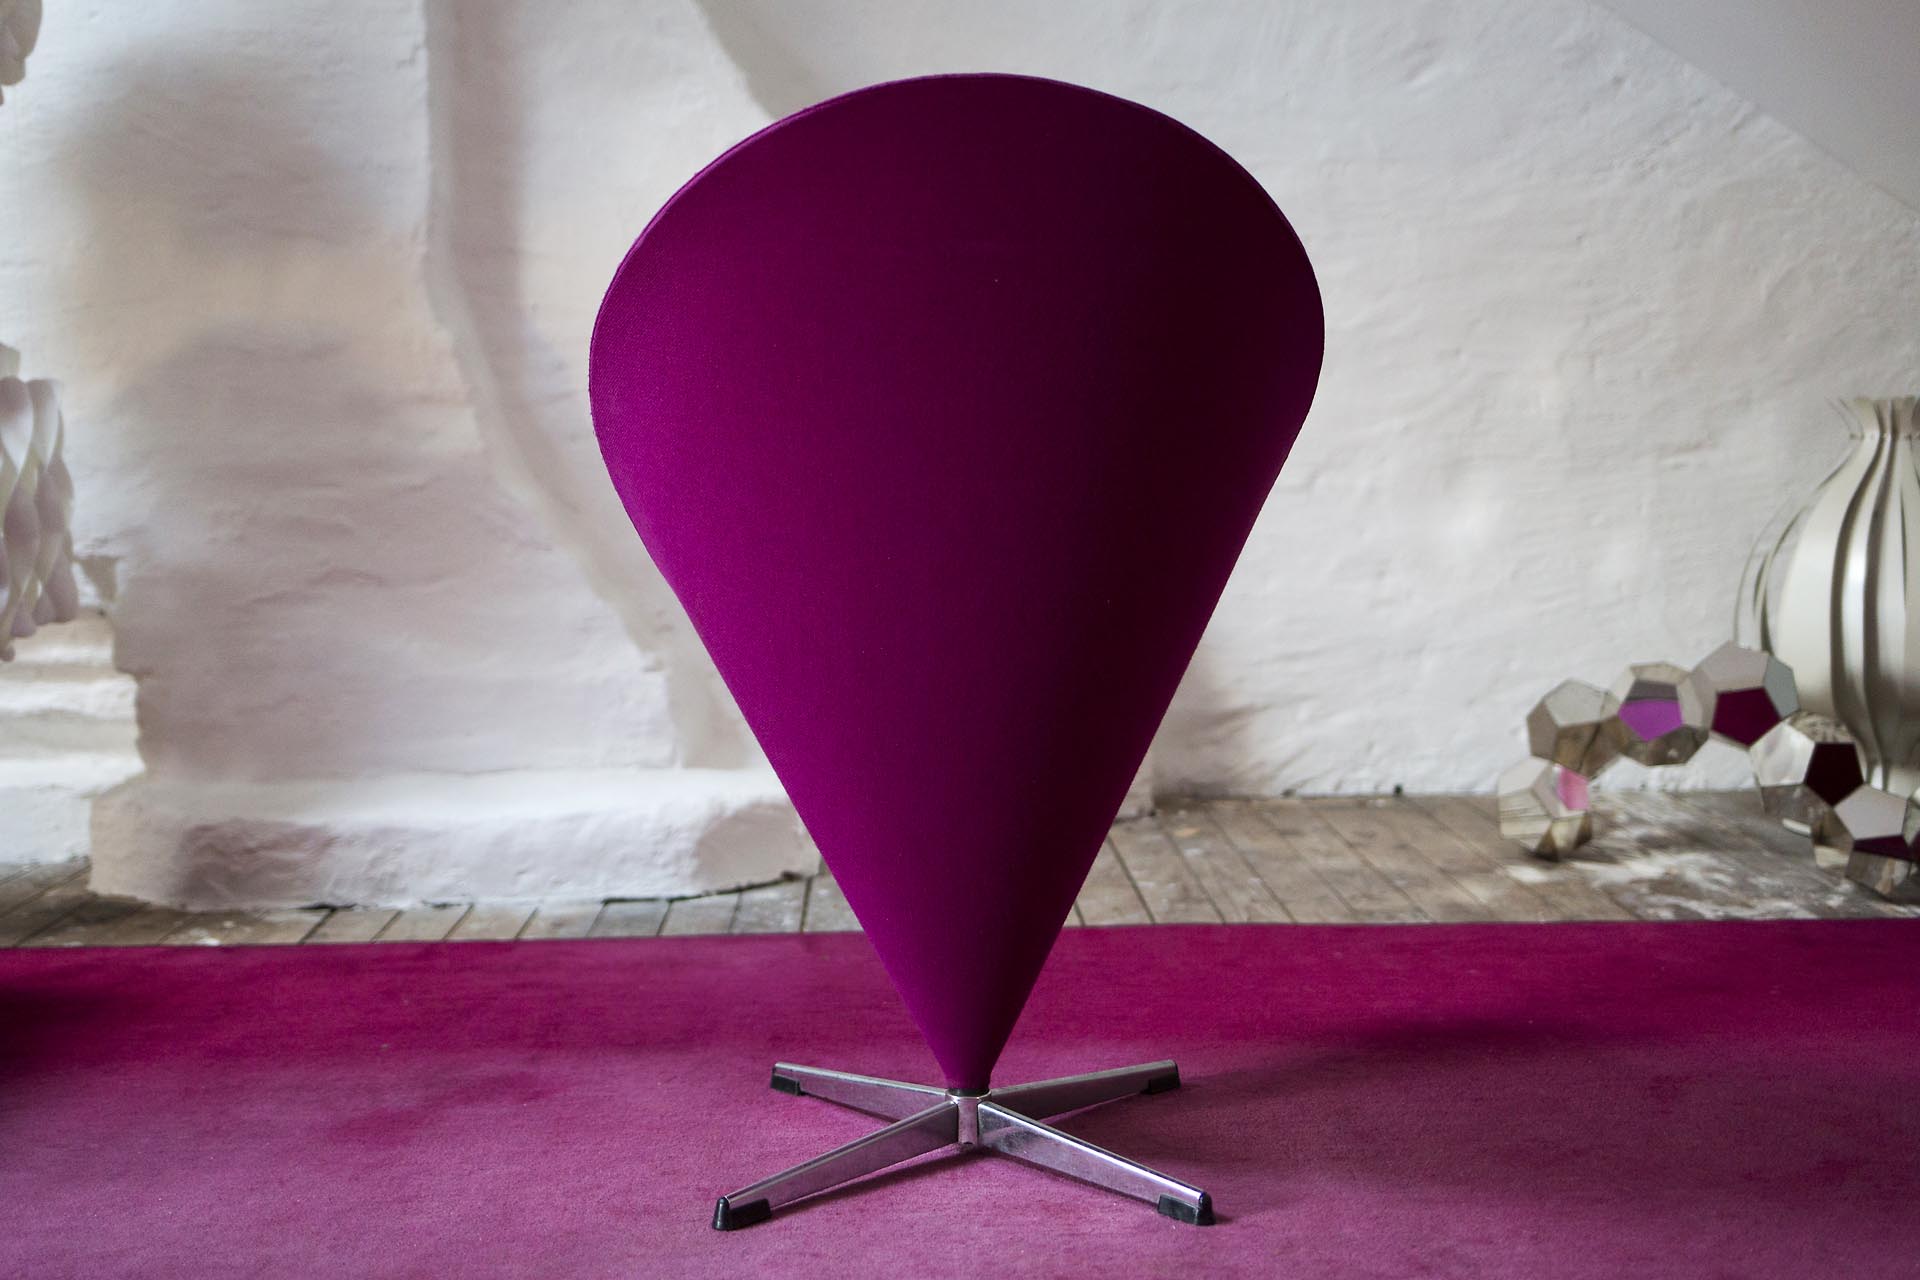 1967 Cone Chair - Sessel 2000